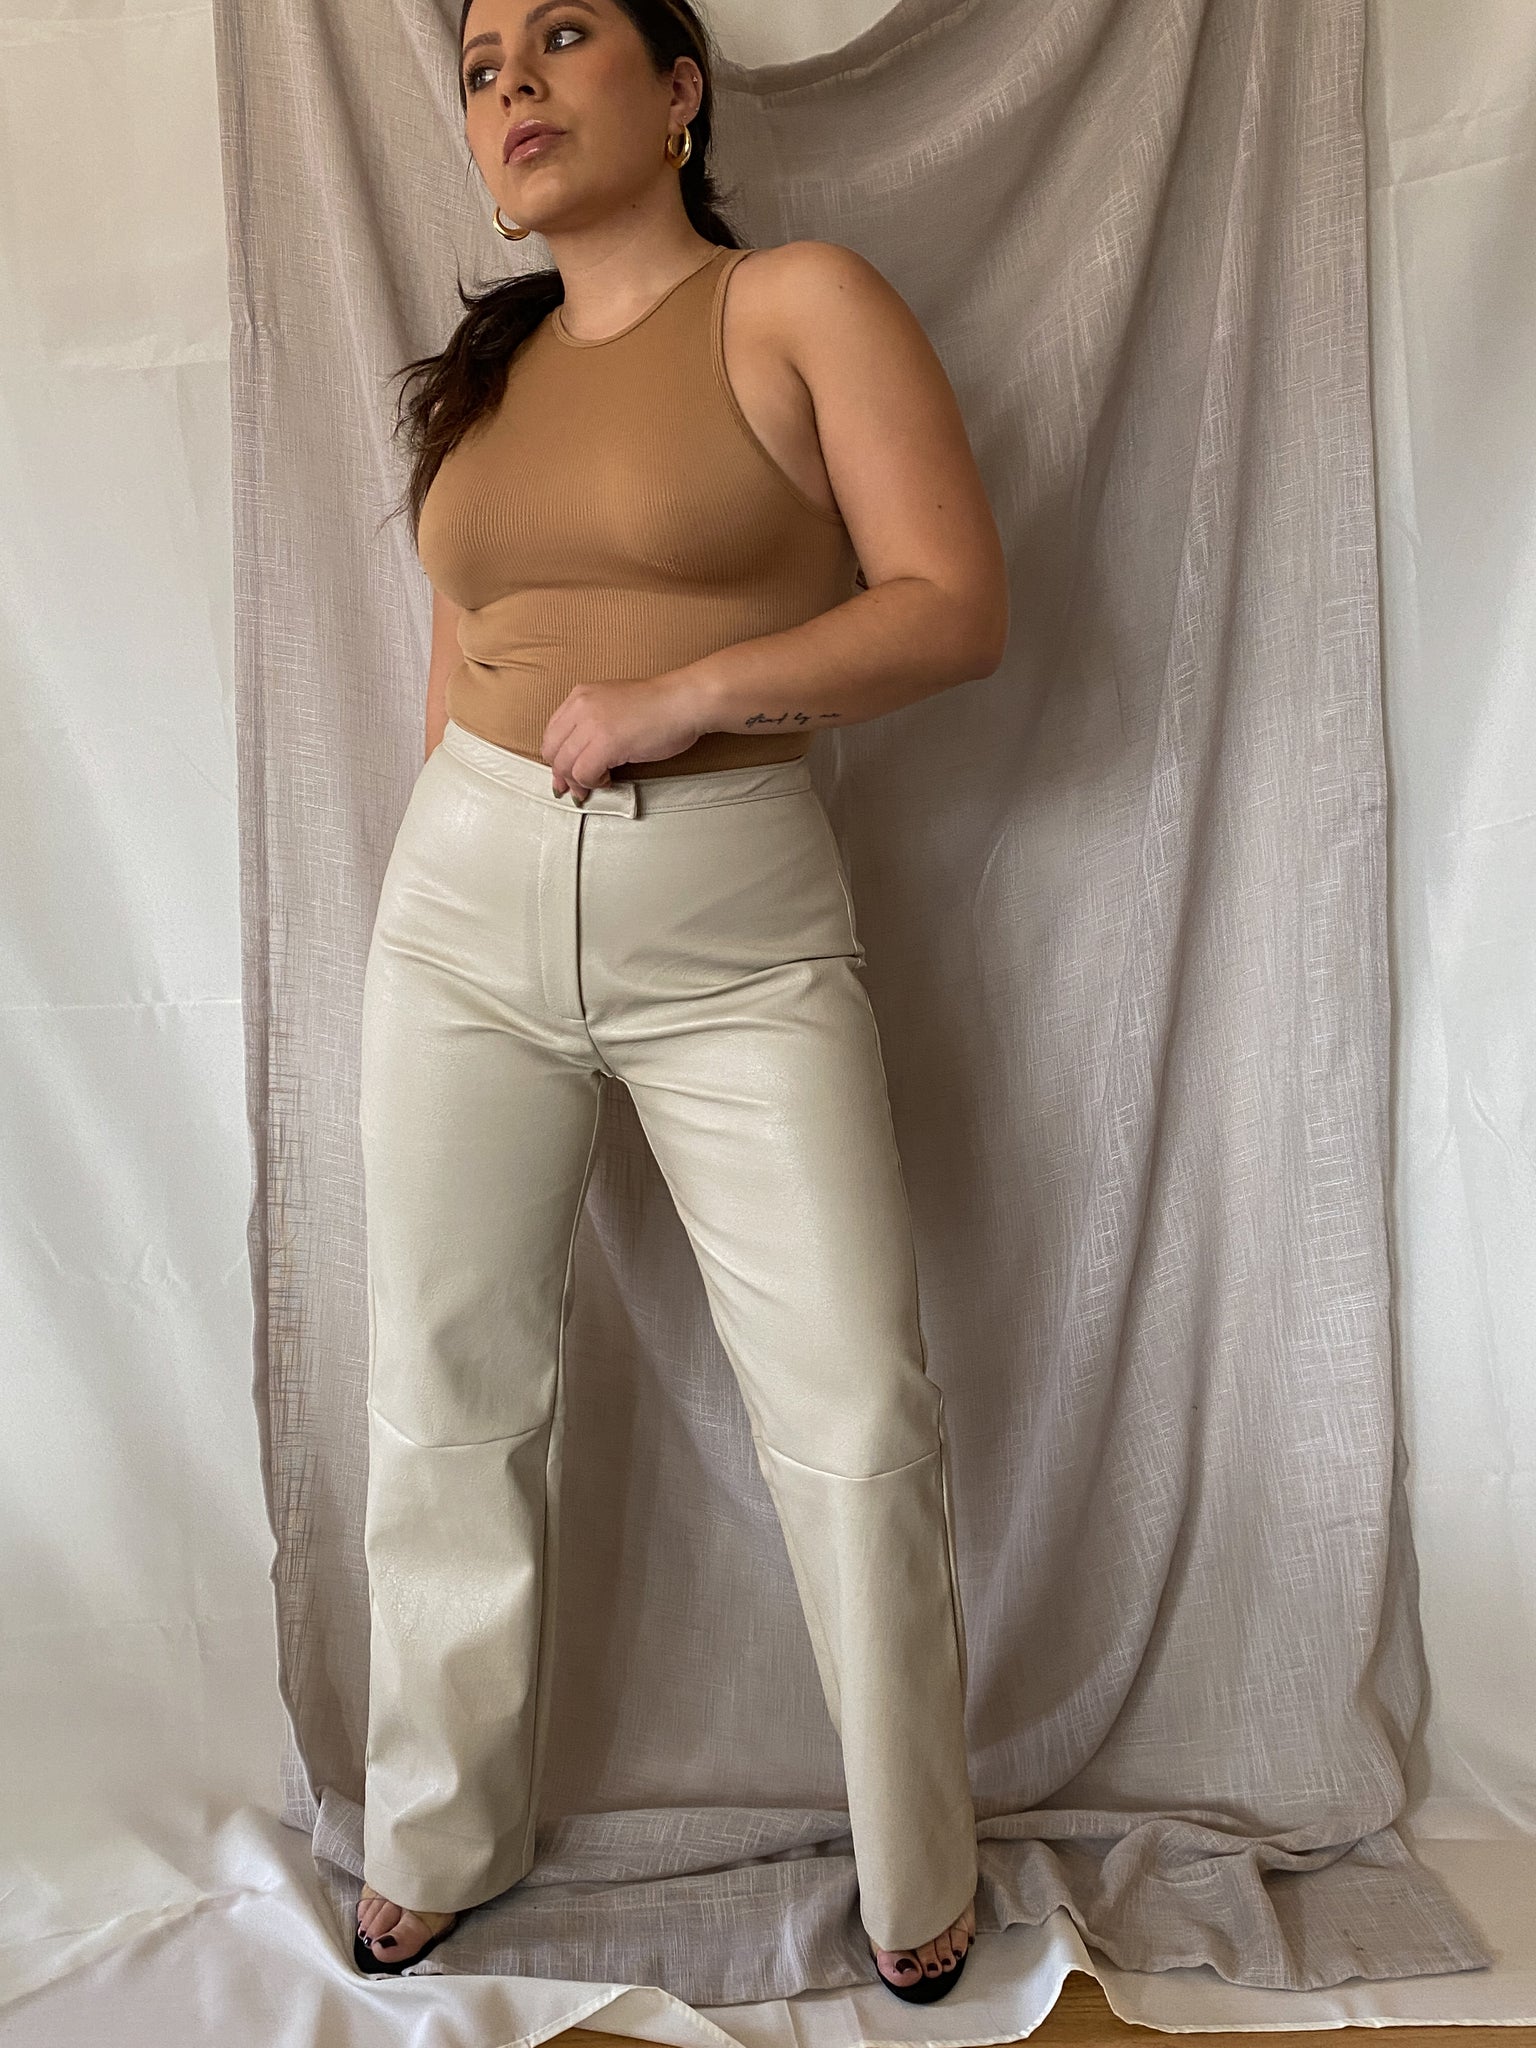 Out West Leather Pants – shopellarae